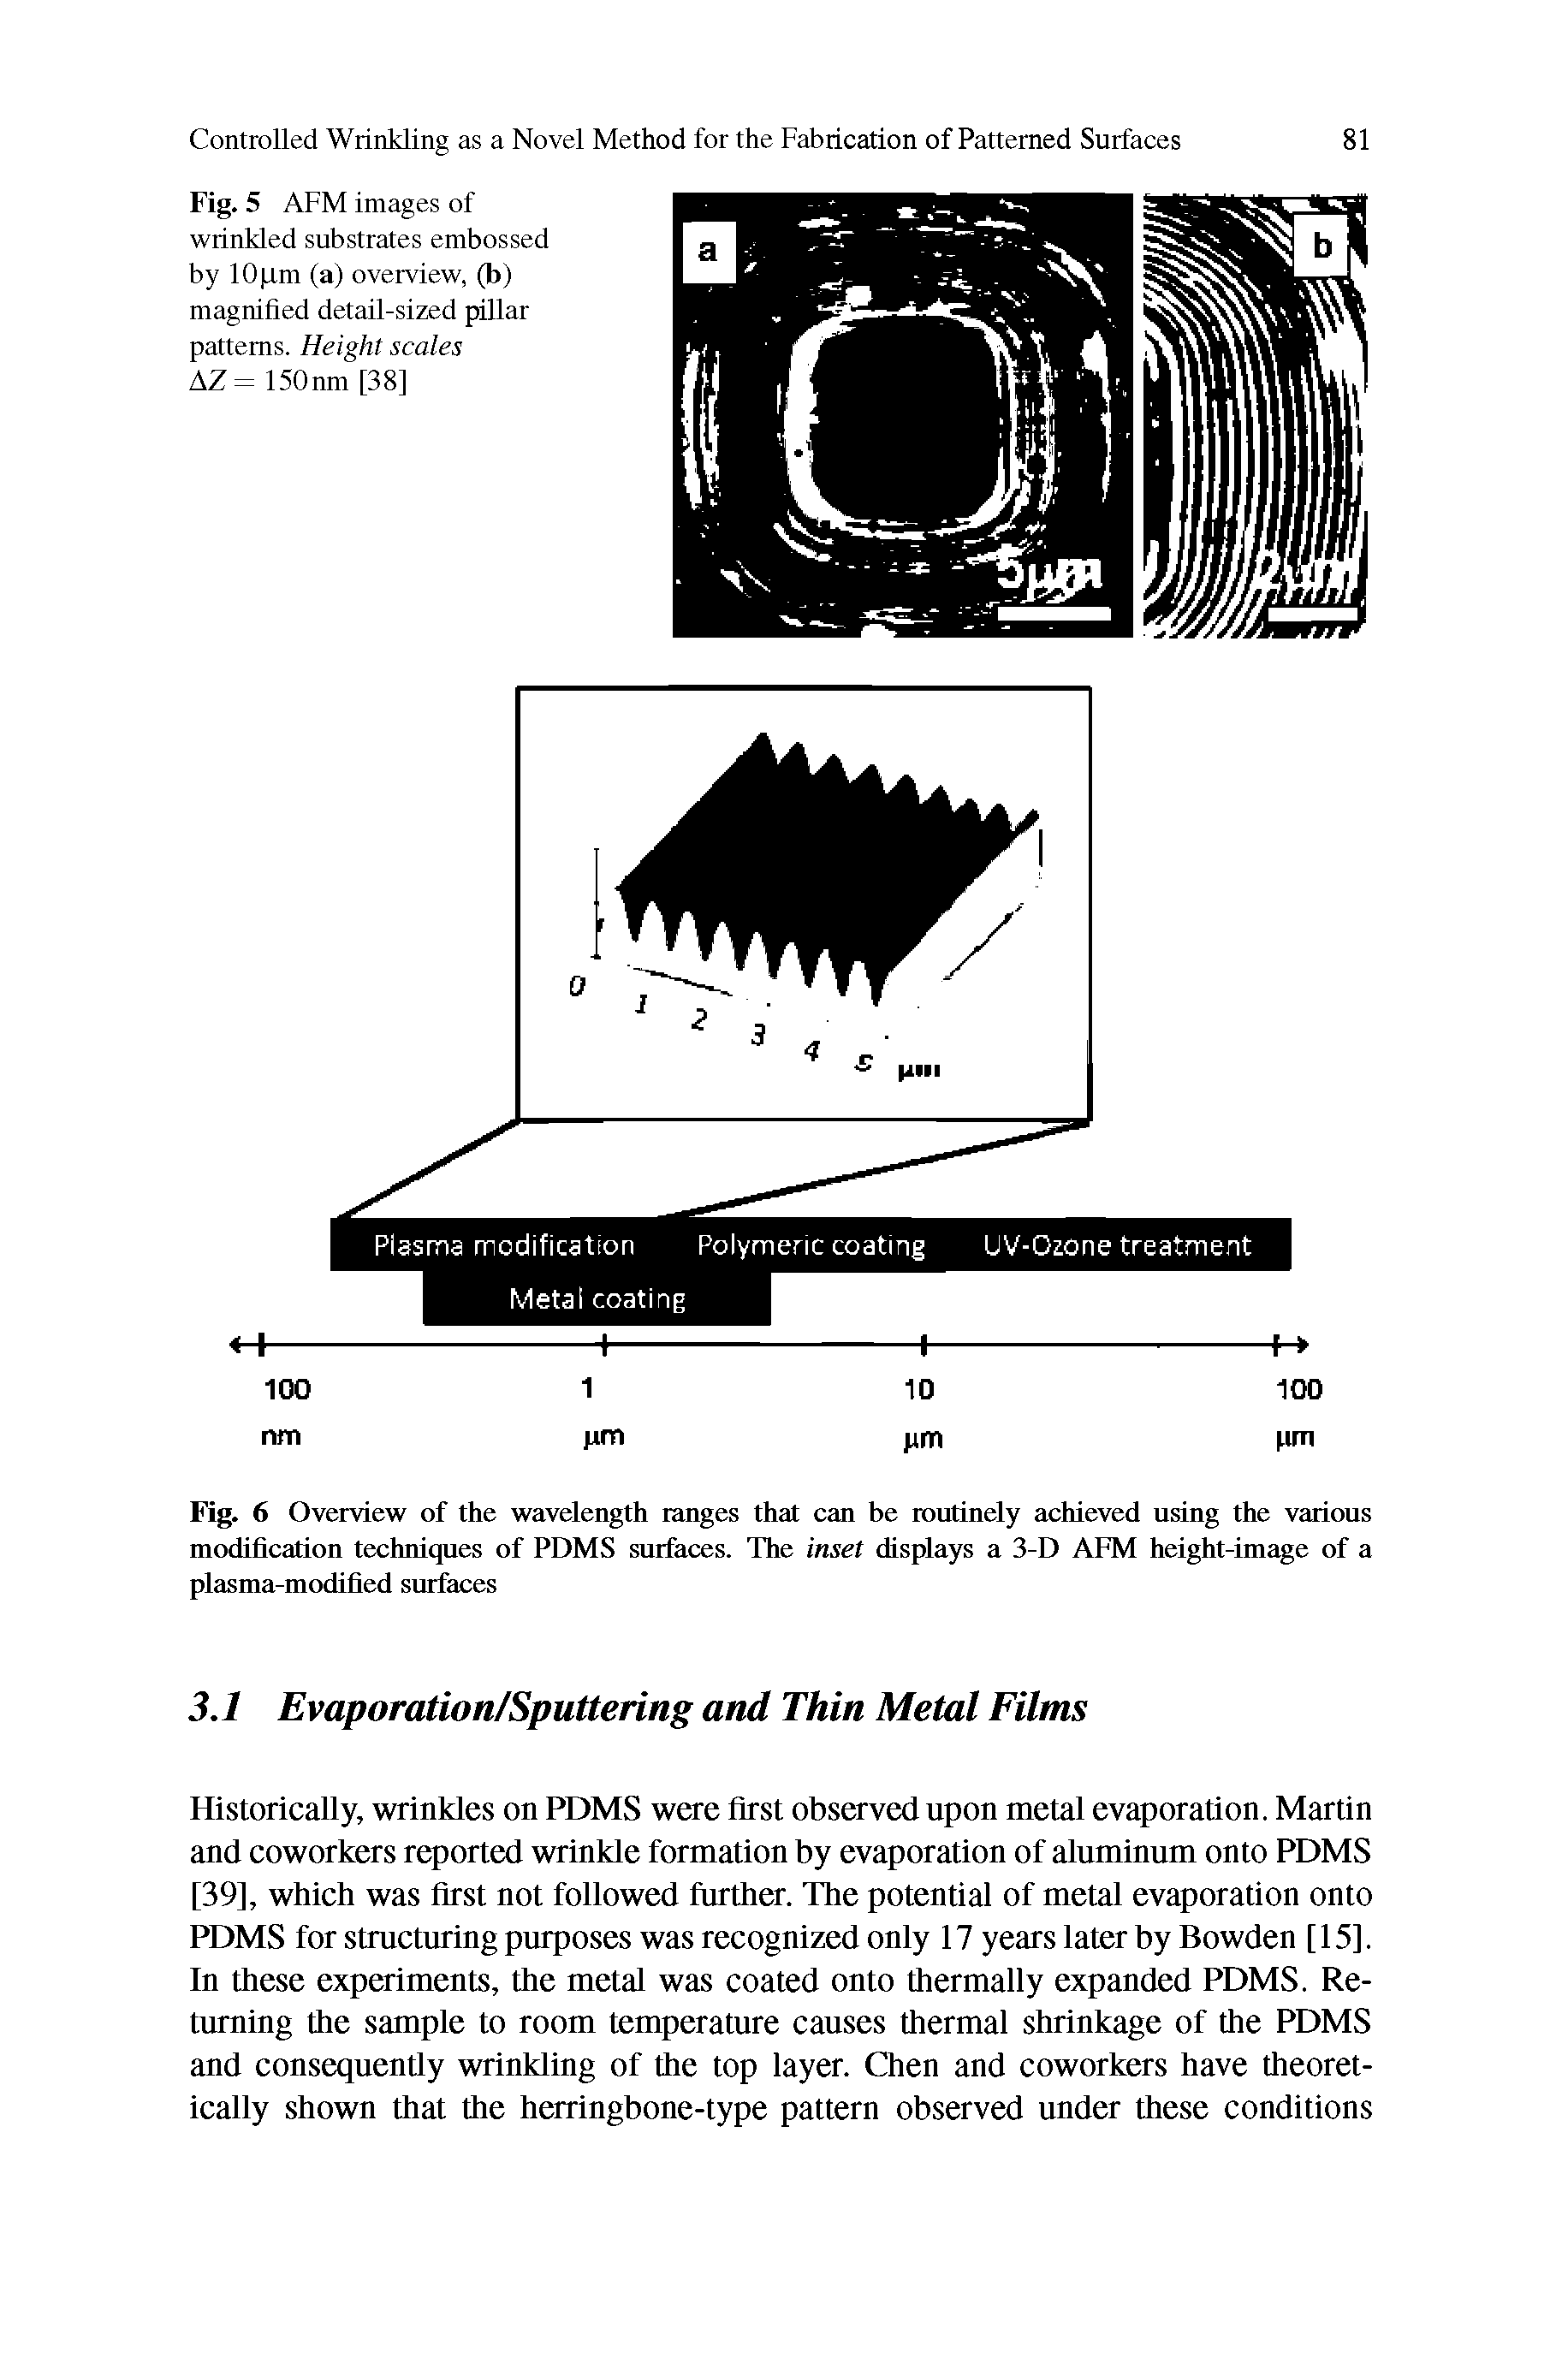 Fig. 6 Overview of the wavelength ranges that can be routinely achieved using the various modification techniques of PDMS surfaces. The inset displays a 3-D AFM height-image of a plasma-modified surfaces...